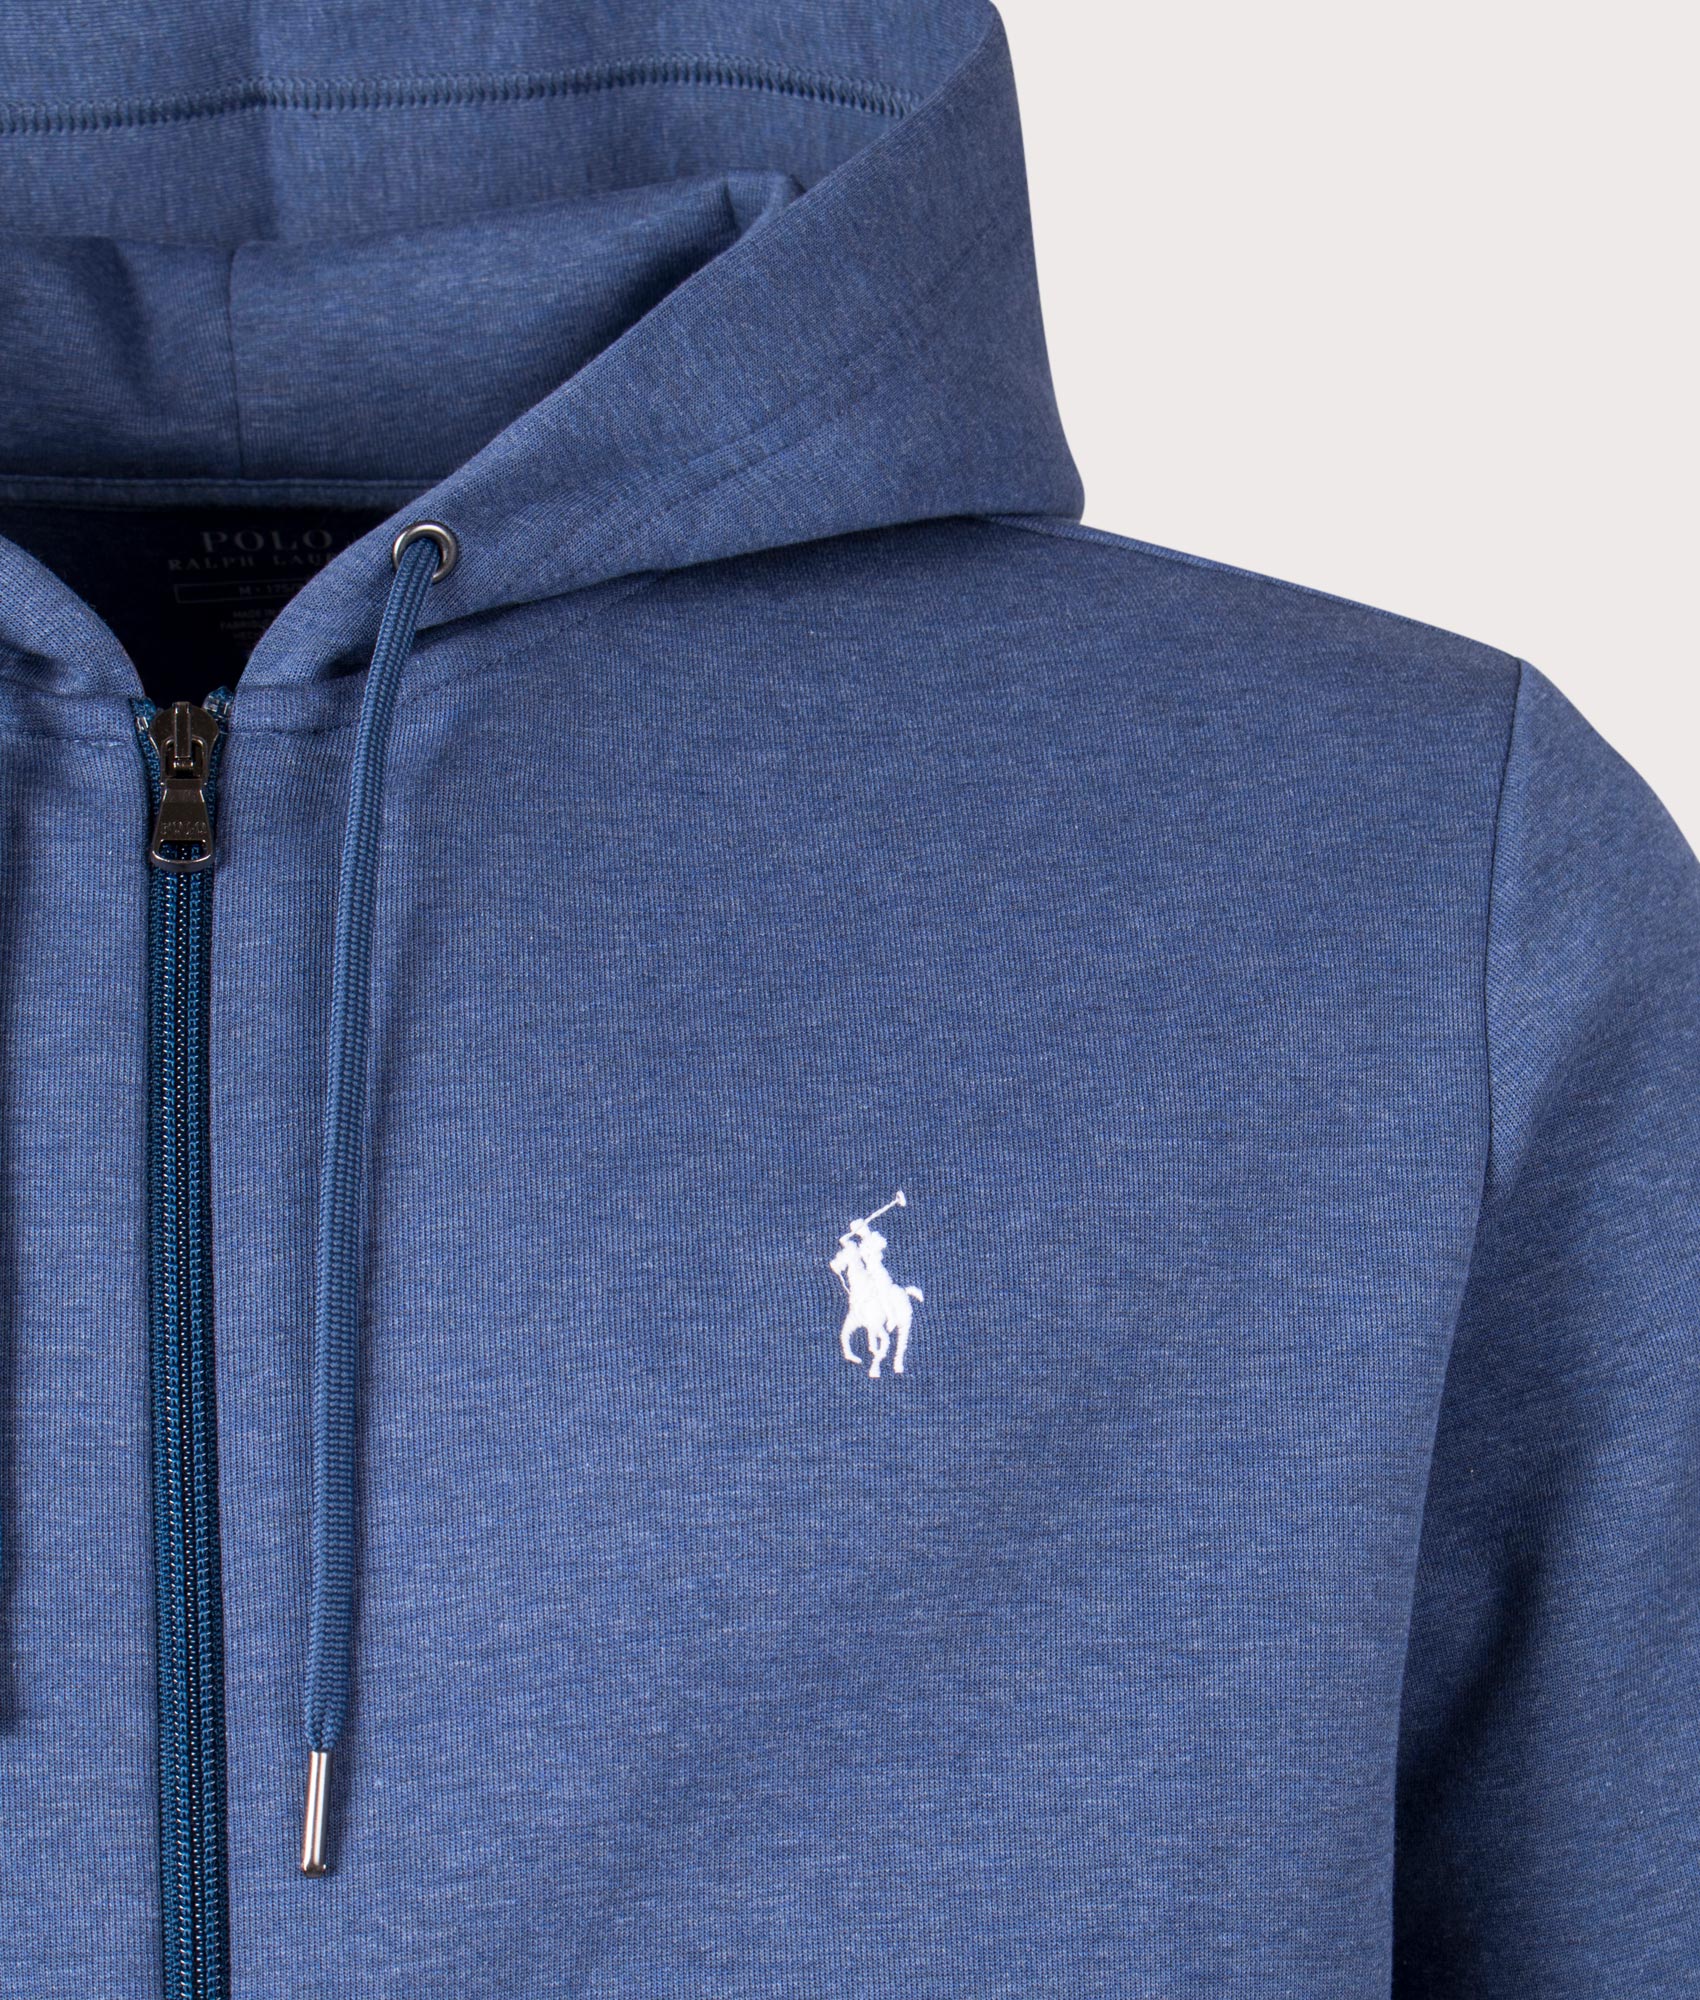 Double Knit Zip Up Hoodie Derby Blue Heather